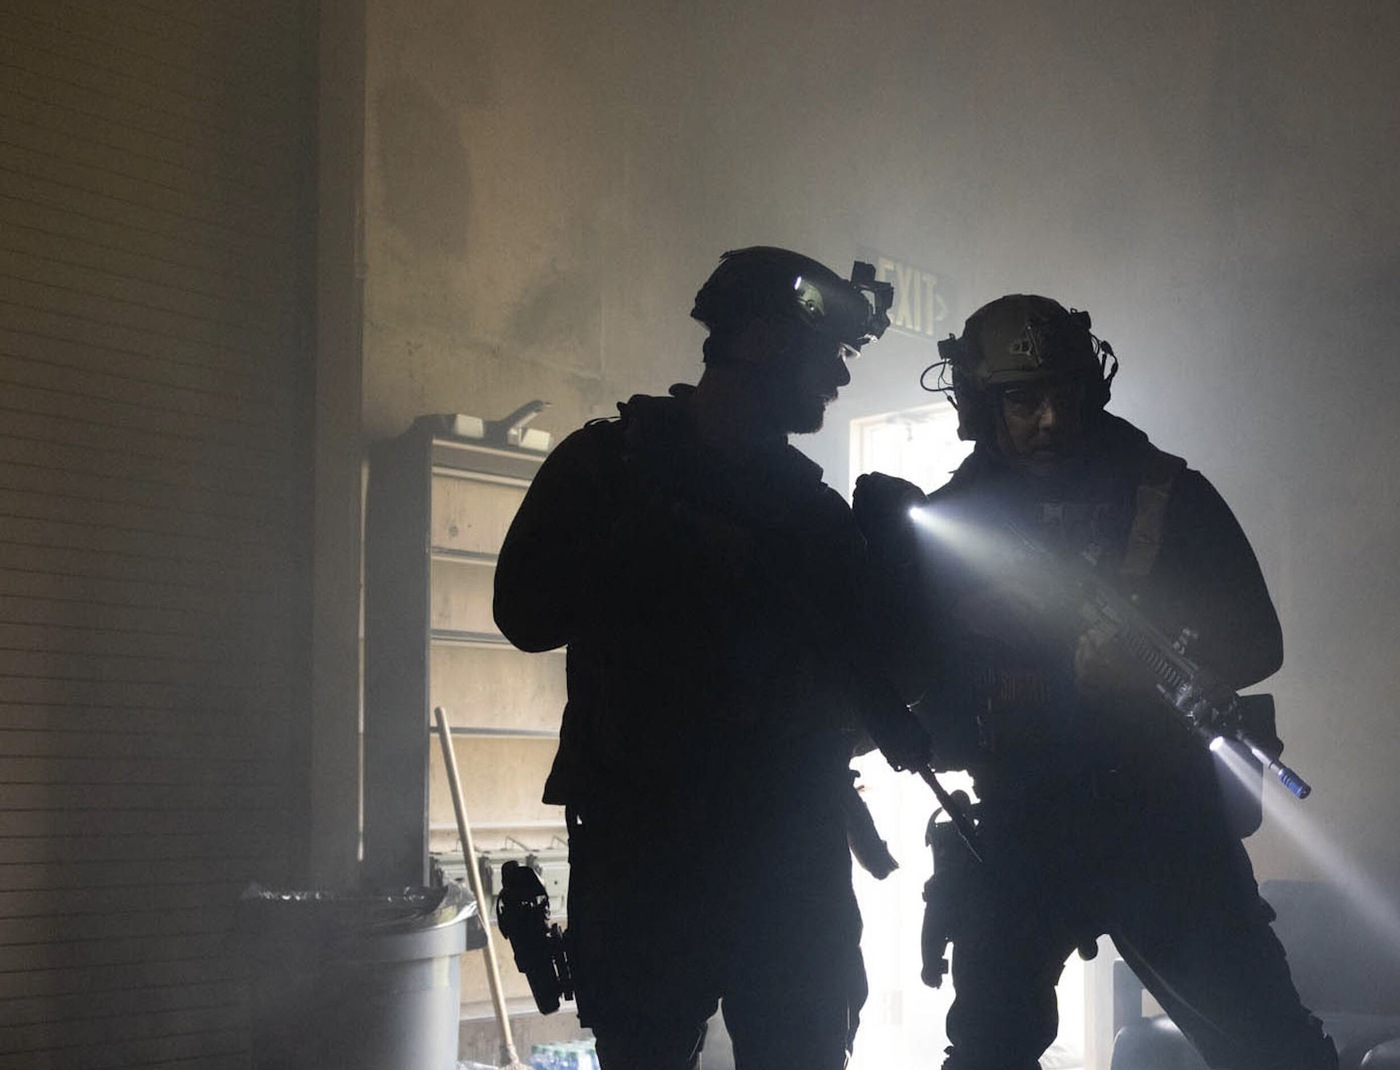 Public safety bomb technicians continue their threat assessment during a training exercise.
